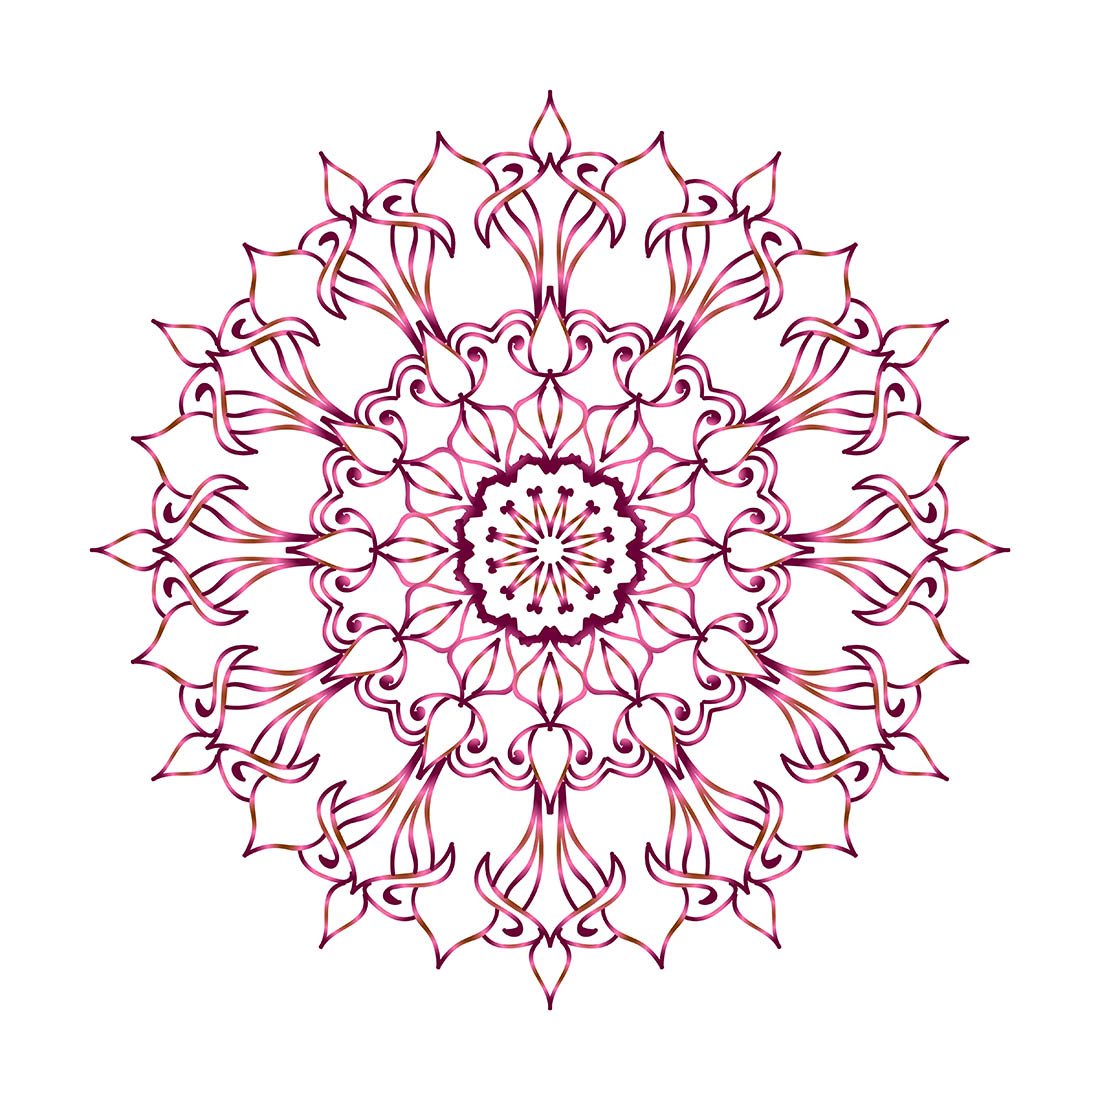 Meditation Mandala On Islamic Circles Vintage Flowers Abstract Unique Pattern With Wedding Card Background Design png classic images cover image.